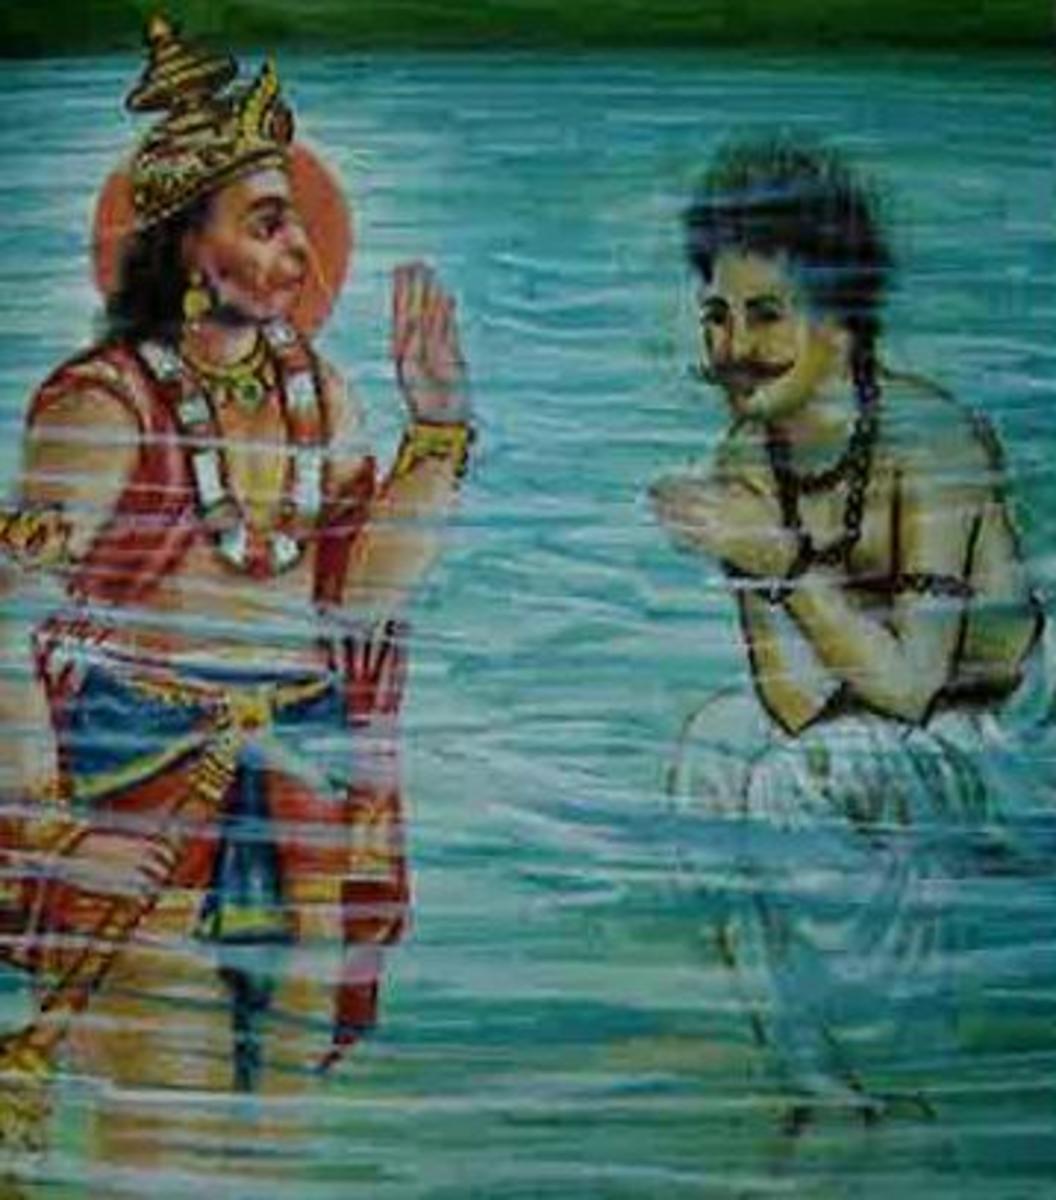 Picture depicting verse 38 of the Hanuman Chalisa